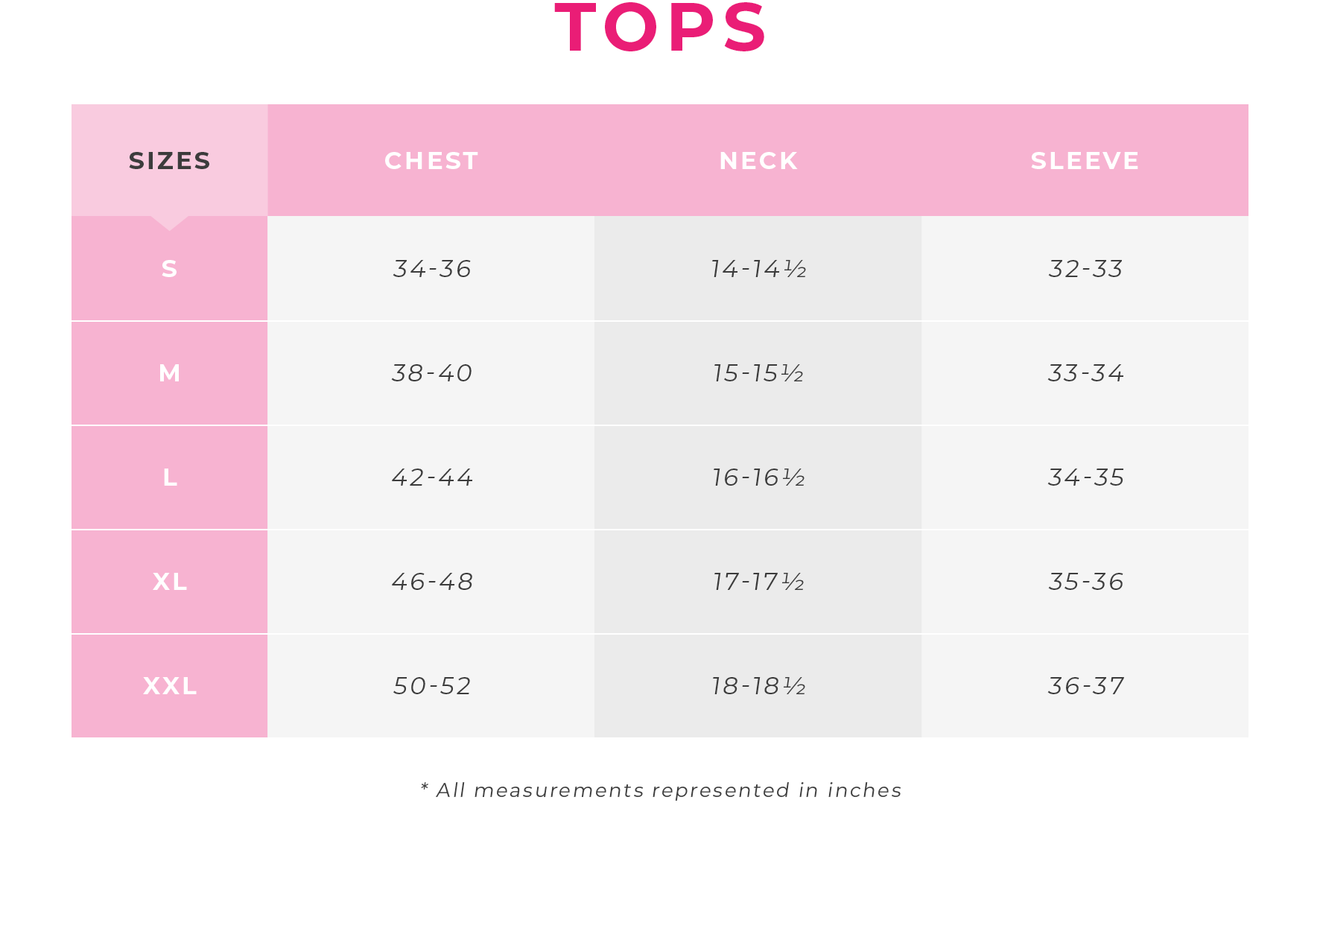 Charotte Russe | Mens Size Guide - Tops